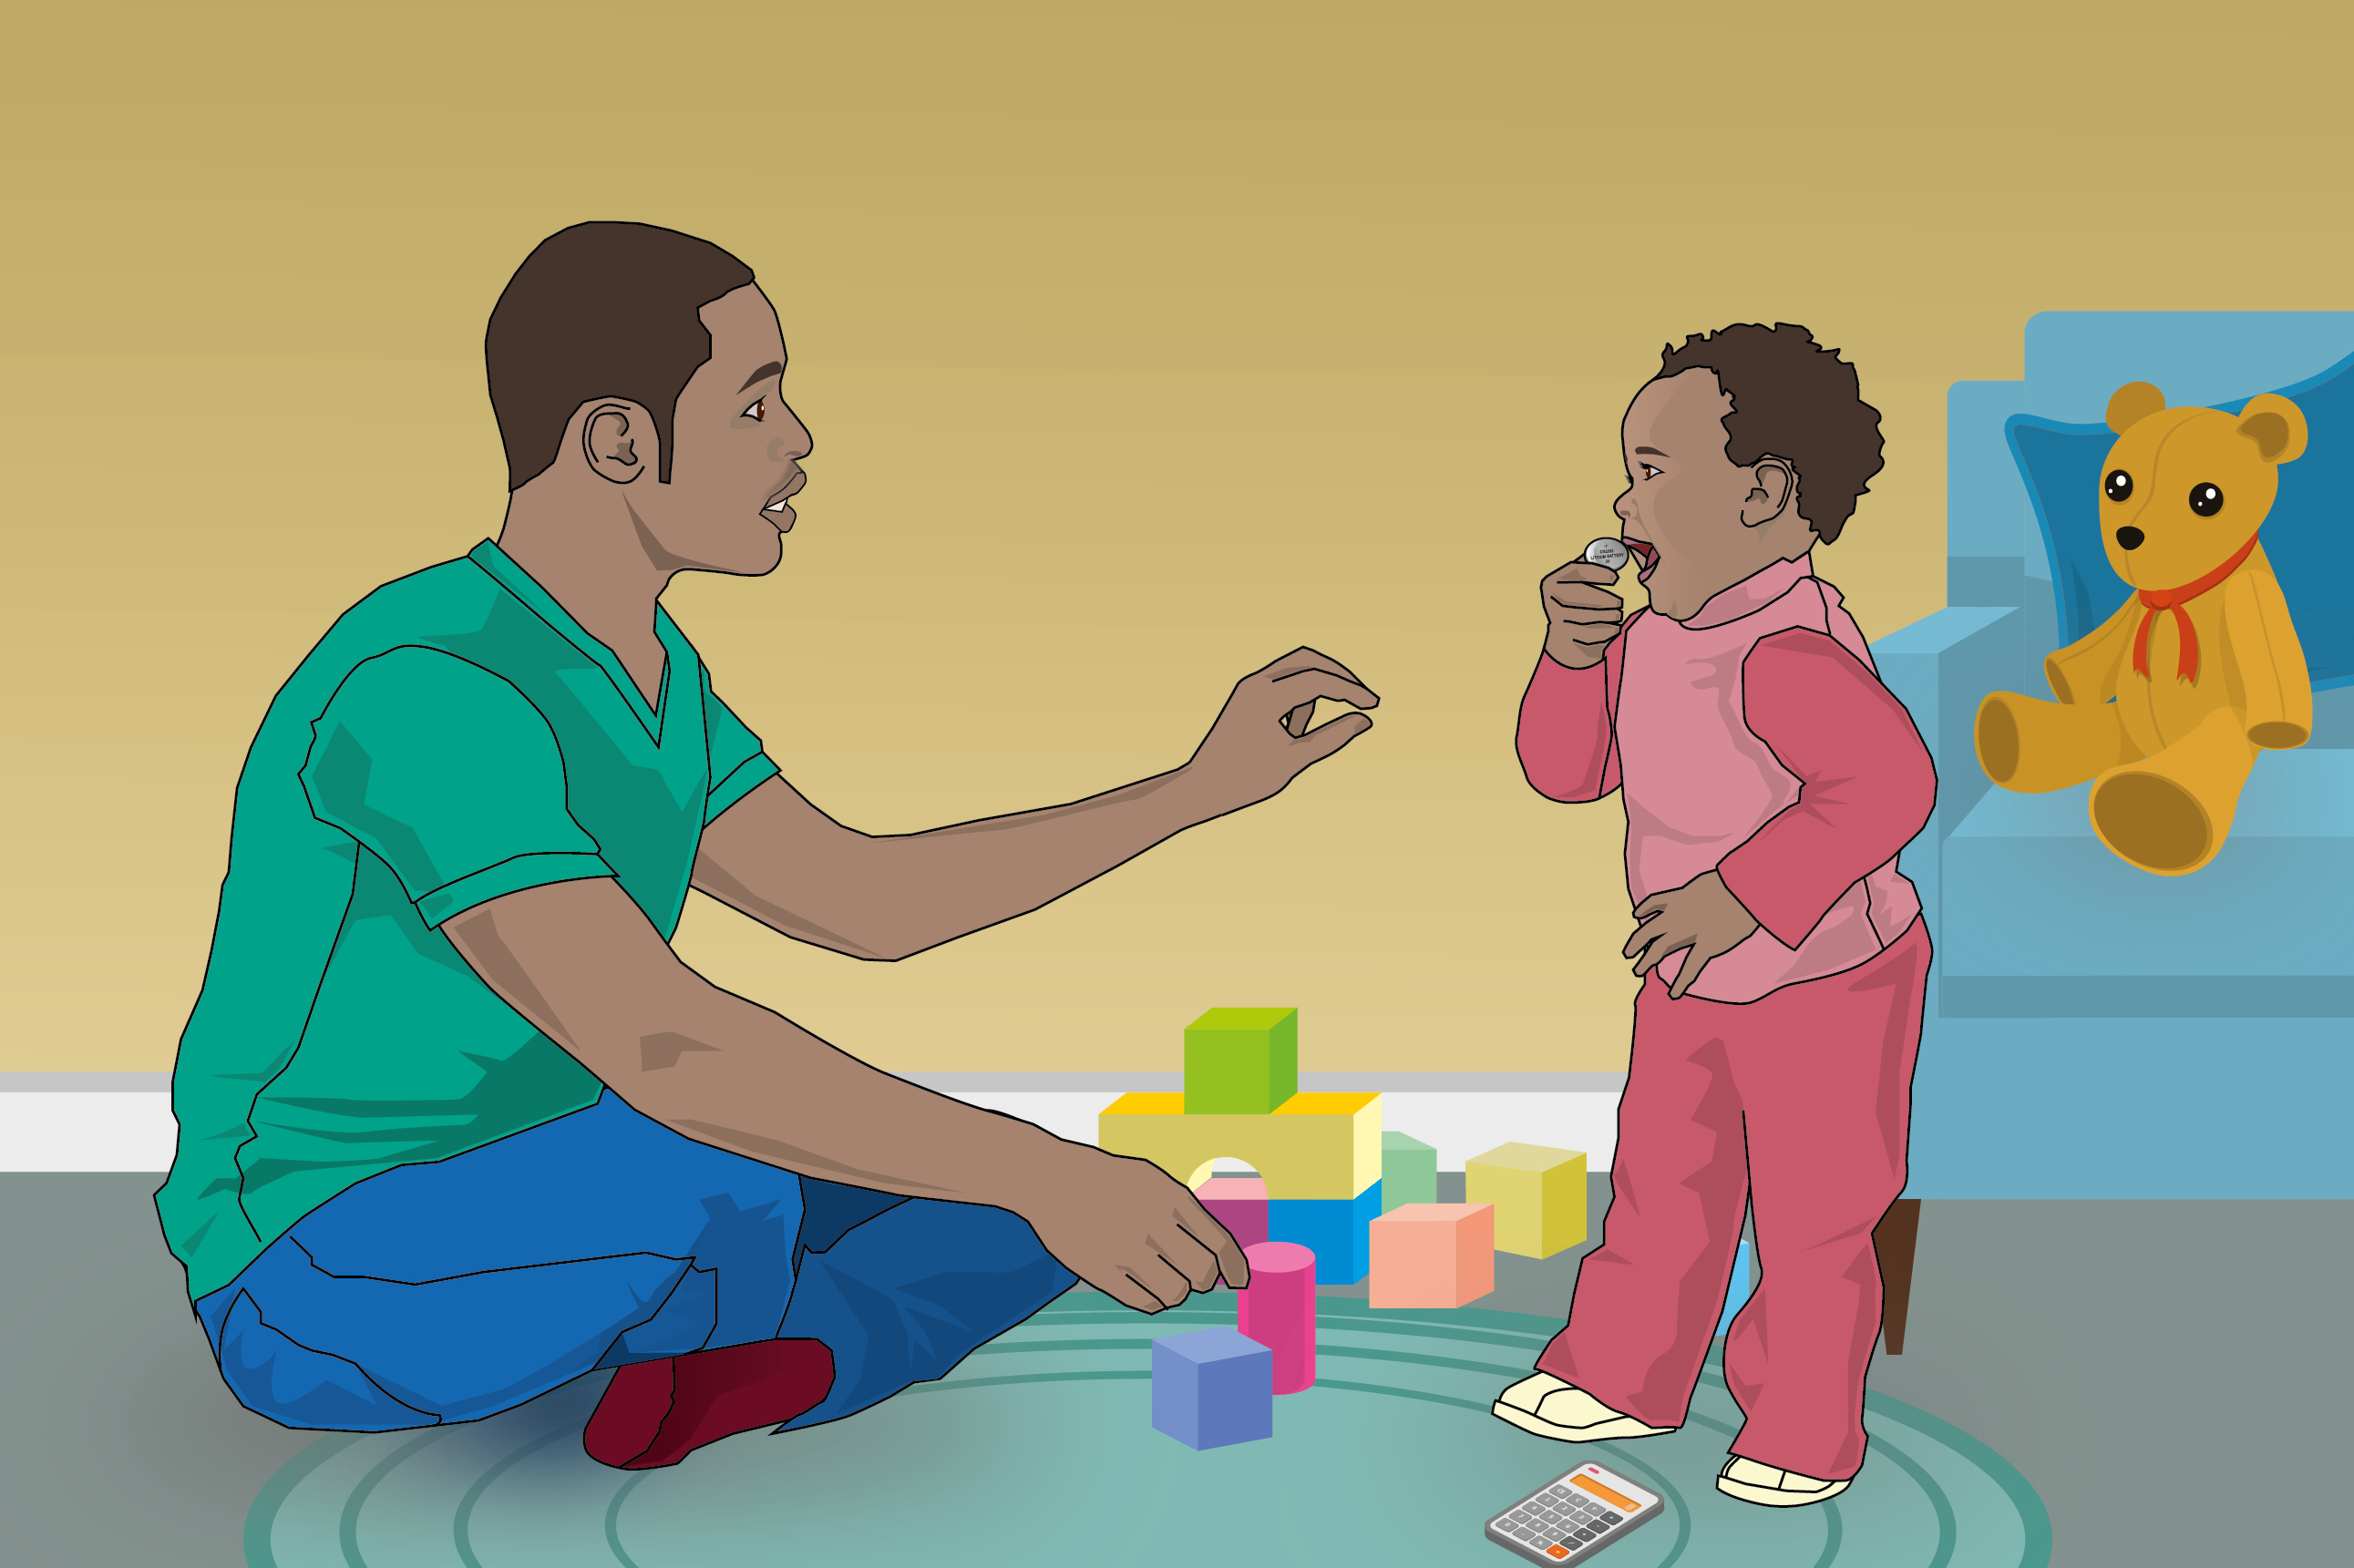 Illustration of a children’s playroom with toys including building blocks and a teddy bear. A father sits on the floor, opposite a standing toddler with a button battery lifted to its mouth. A calculator is at the child’s feet. The father looks surprised and is reaching across towards the child and battery.